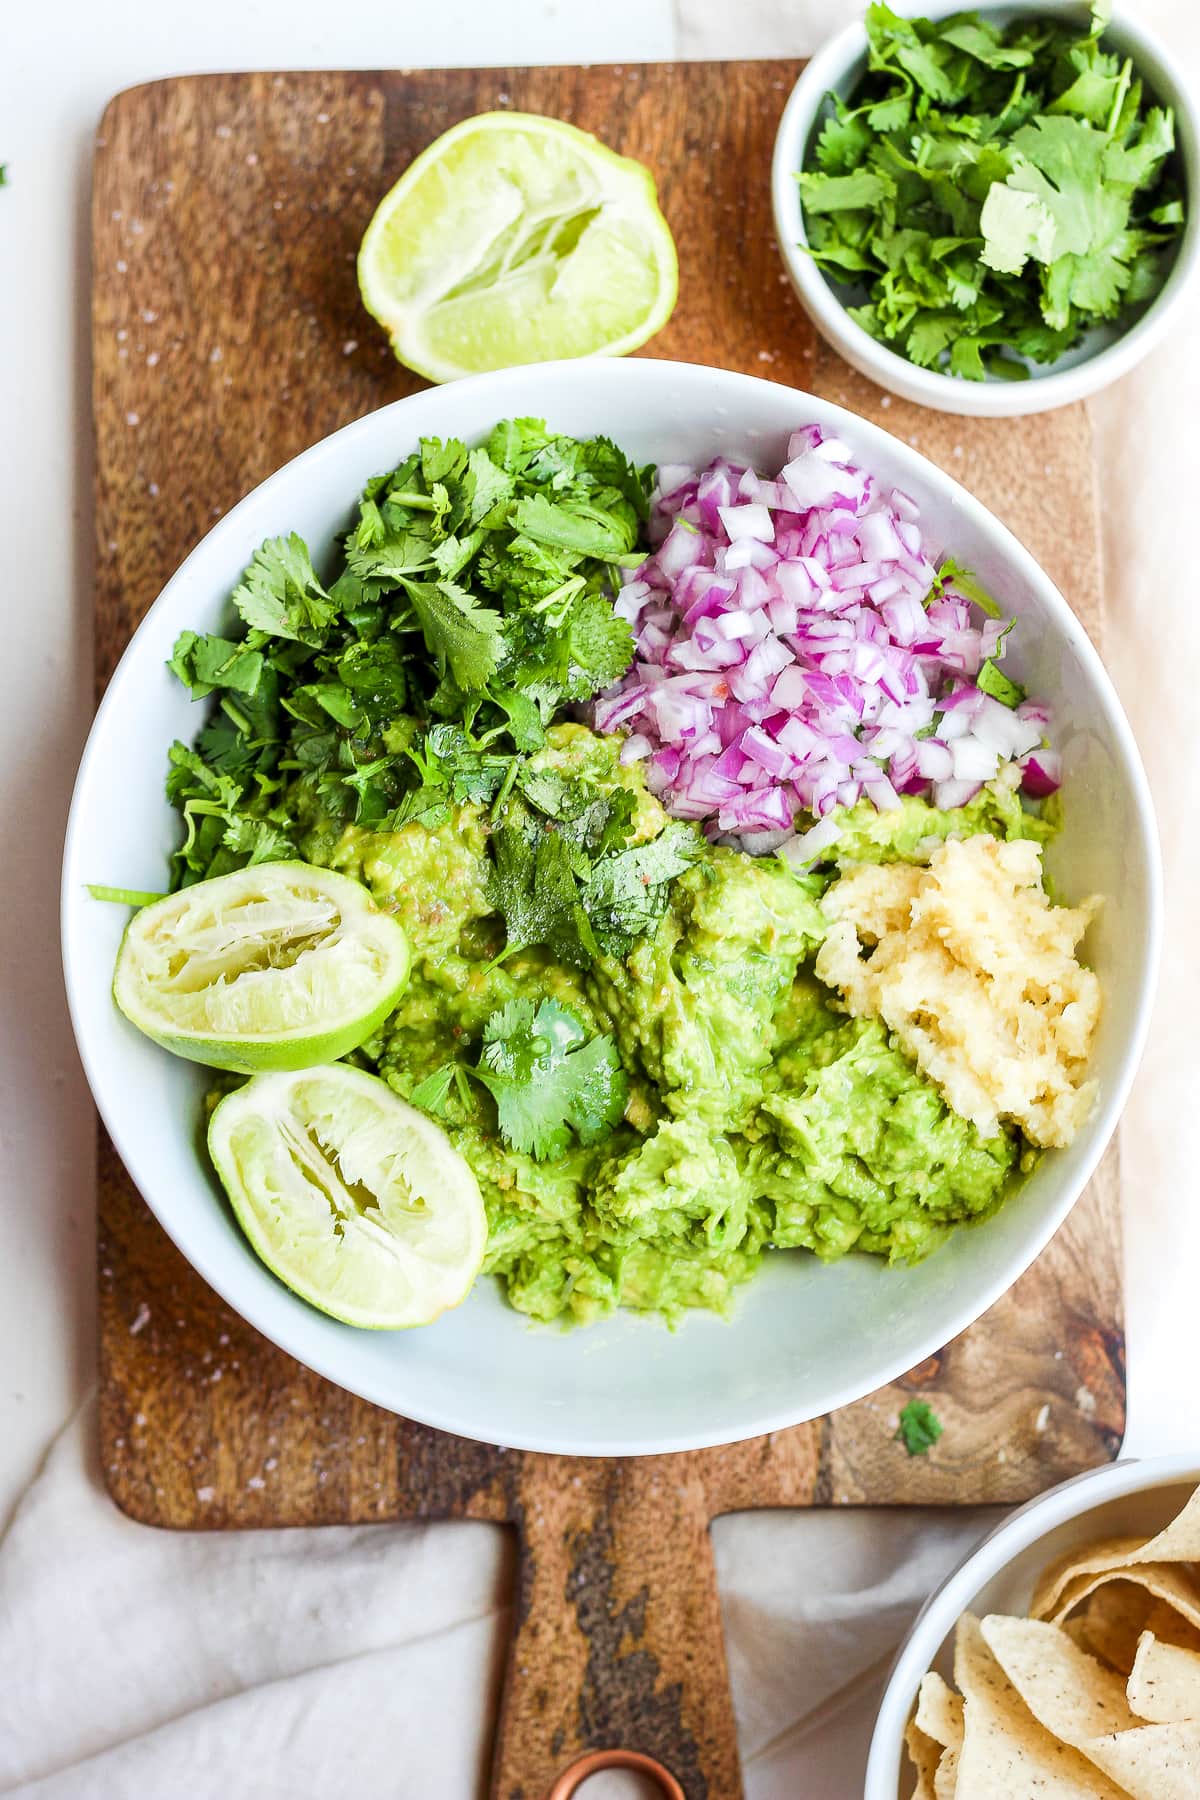 Smashed avocado in a bowl with the other ingredients added.